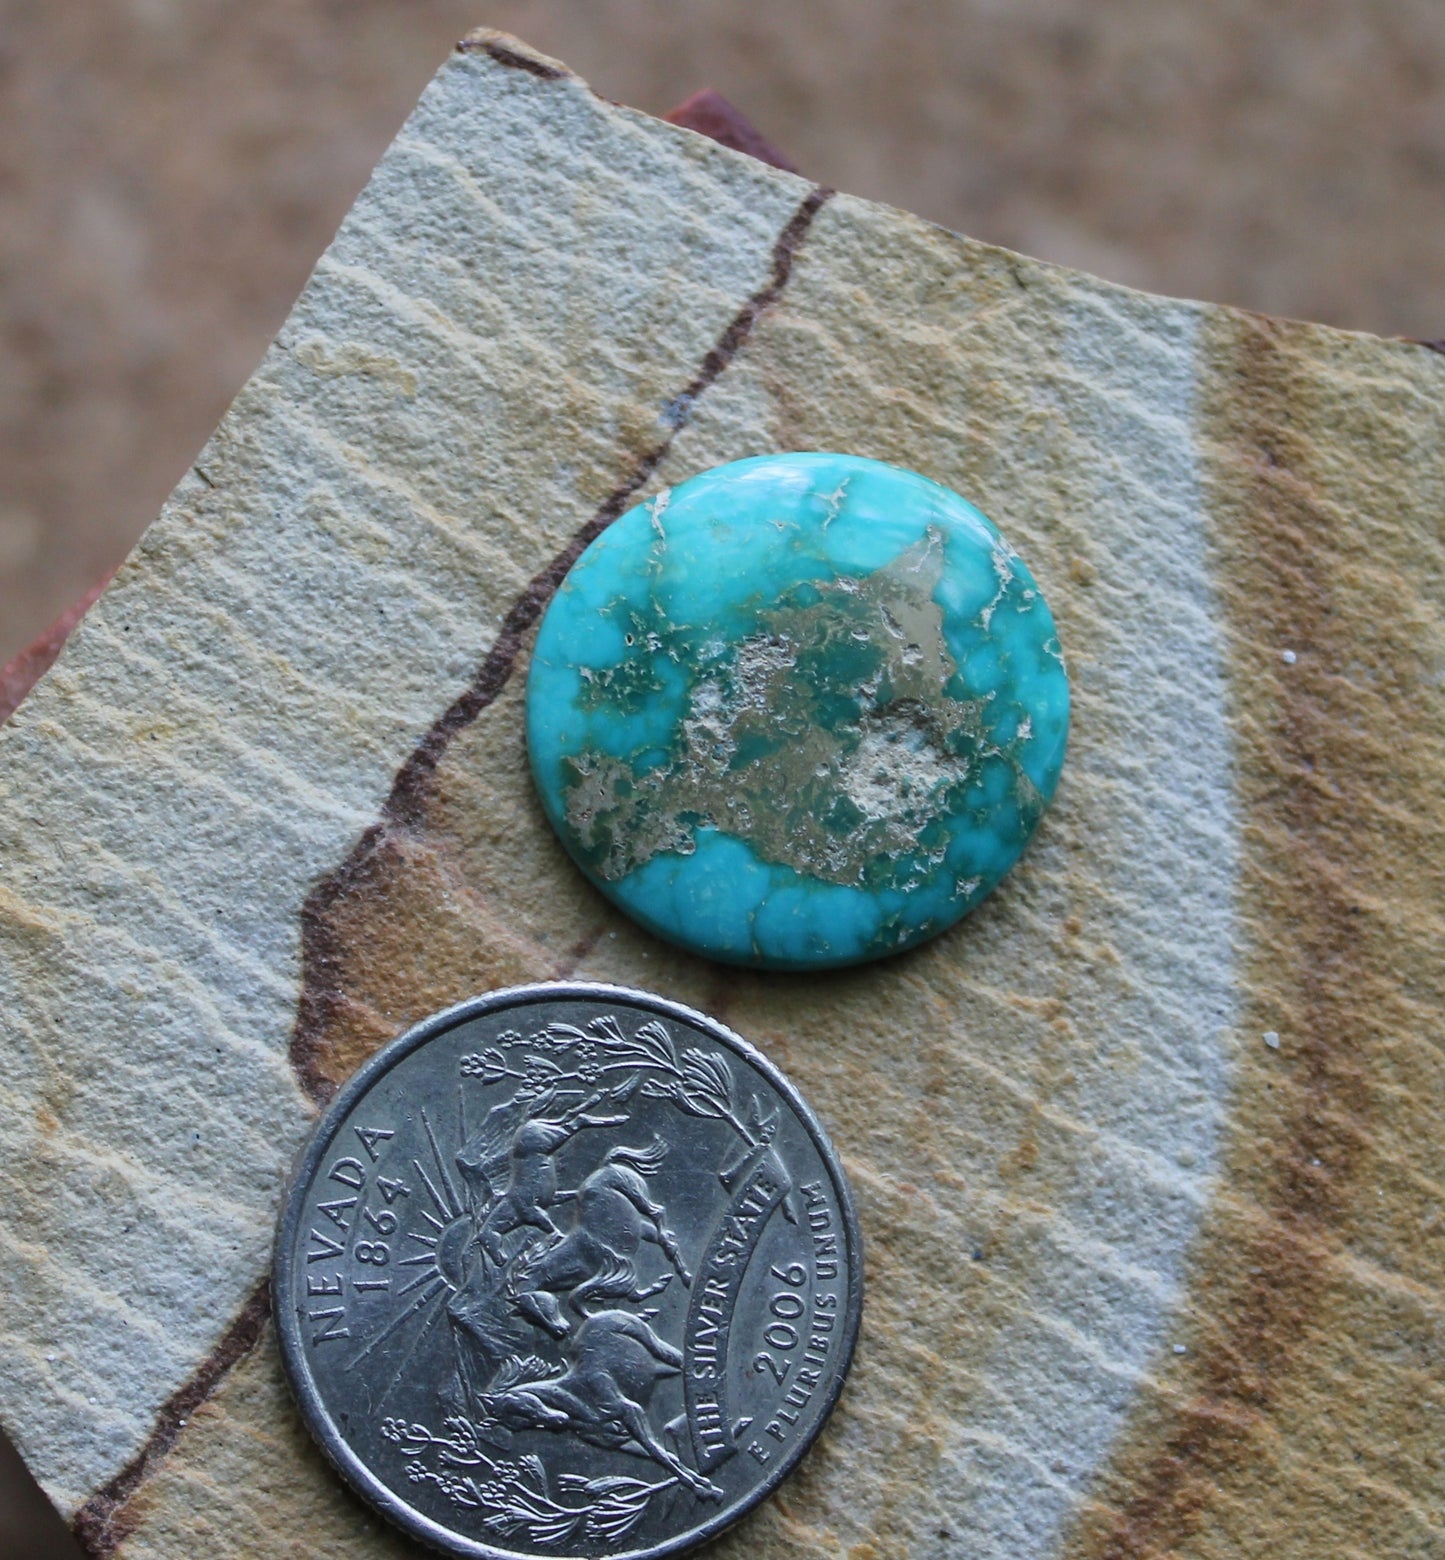 14 carat round green turquoise cabochon from Stone Mountain Mine